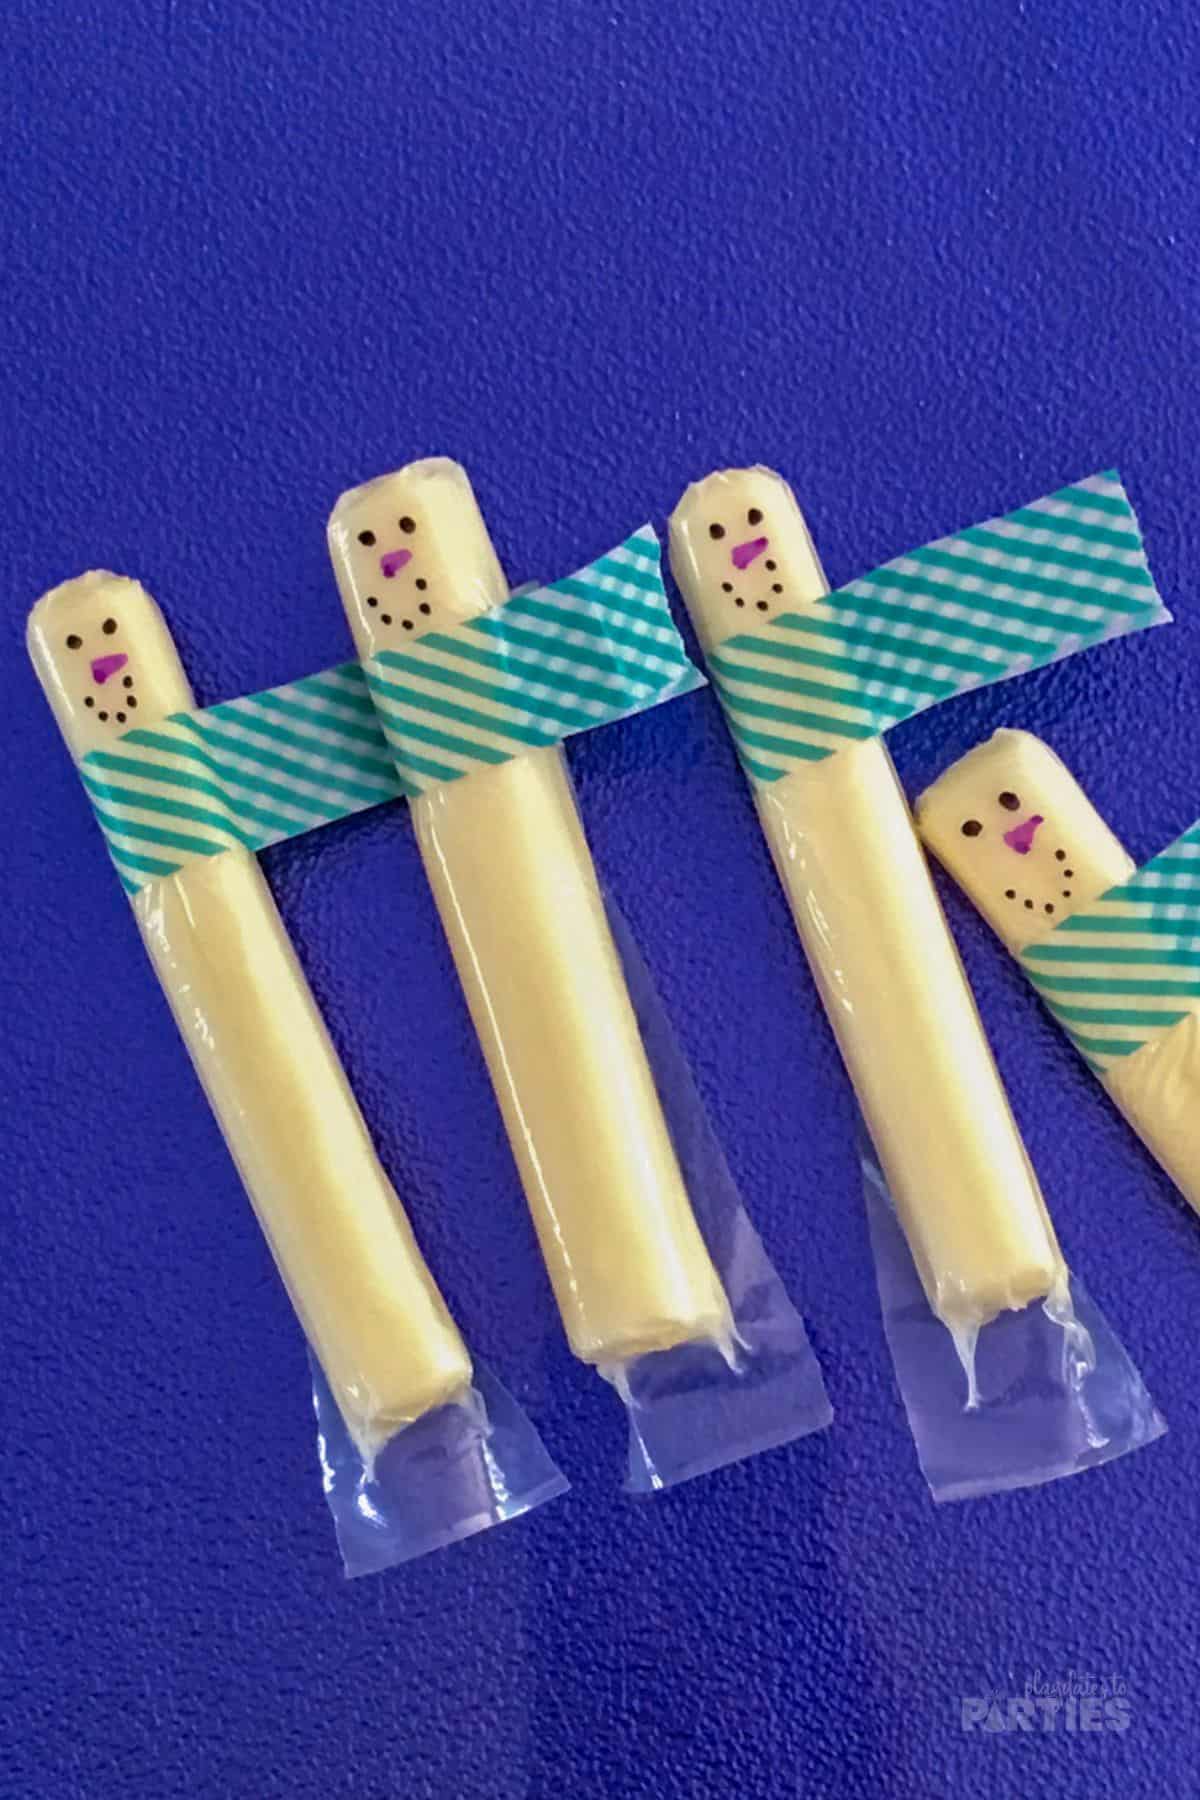 String cheese decorated as snowmen using washi tape.